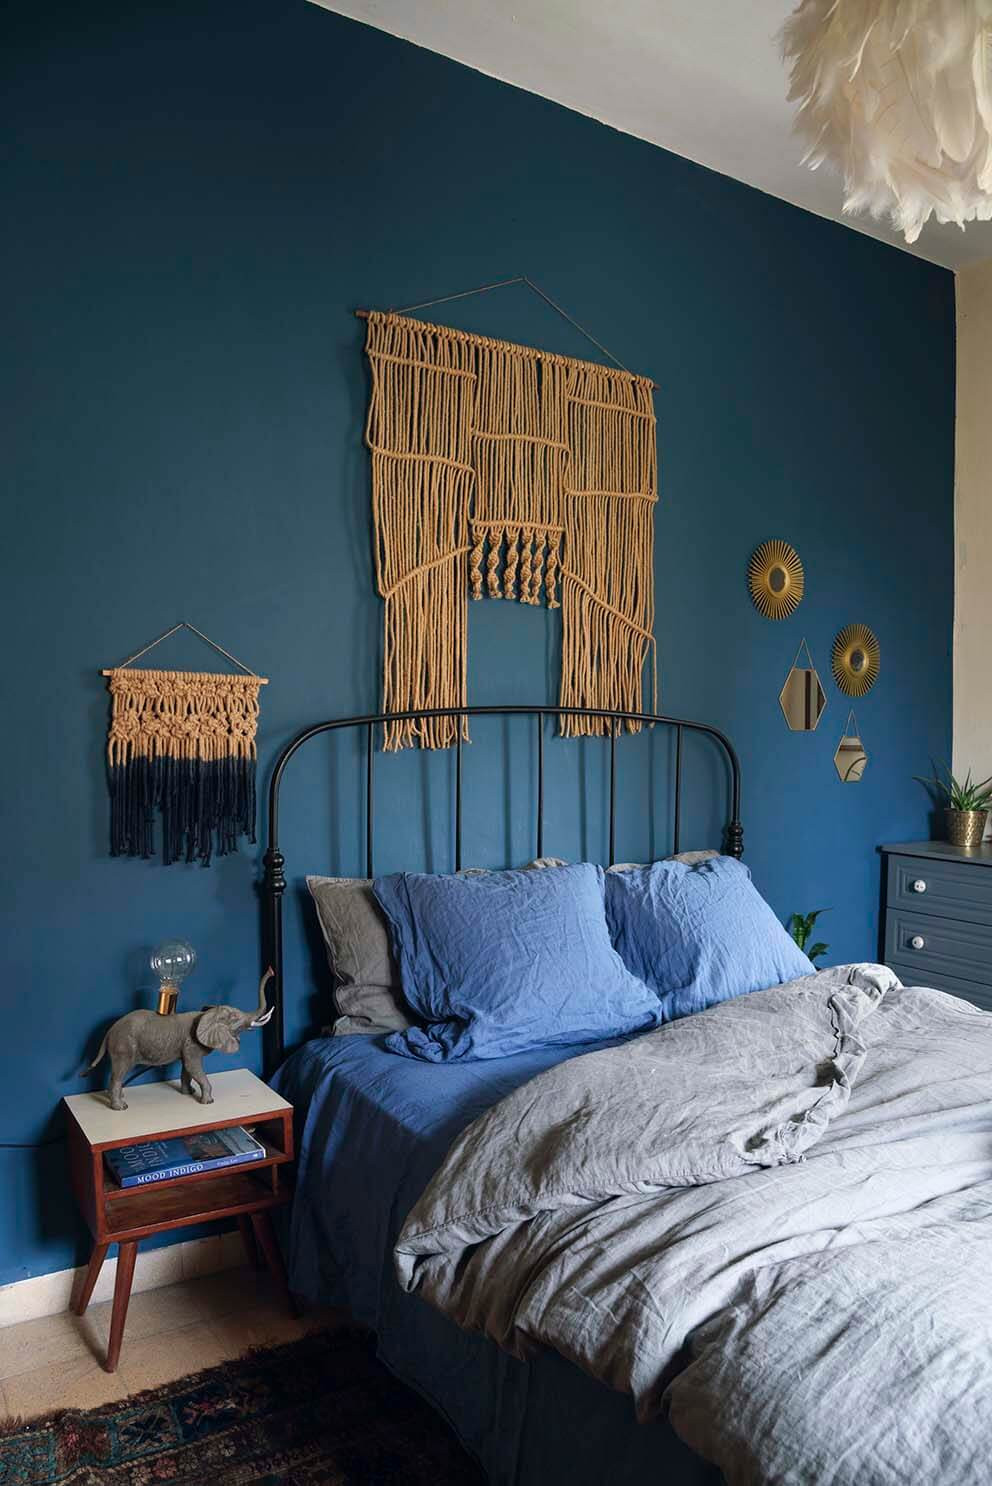 Blue Accent Wall Bedroom
 This Is How To Decorate With Blue Walls